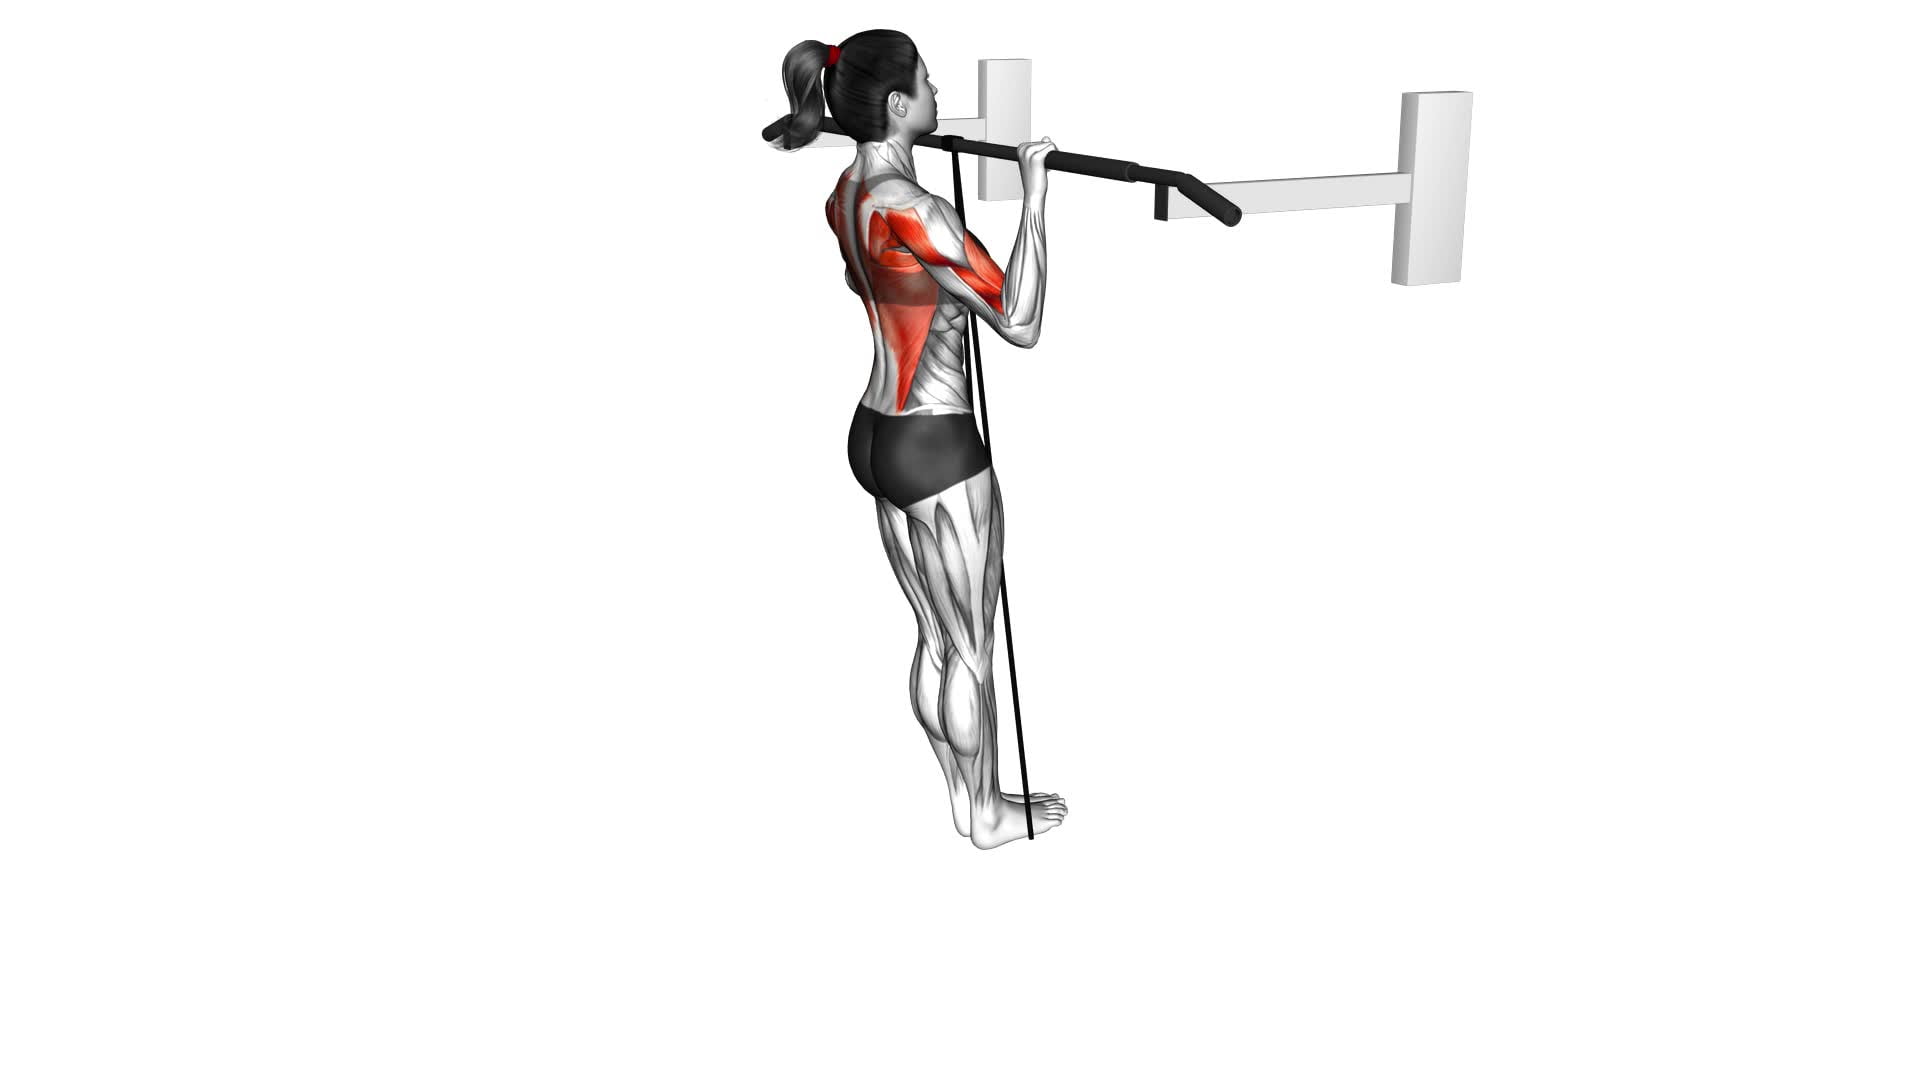 Band Assisted Pull-Up (VERSION 3) (female) - Video Exercise Guide & Tips